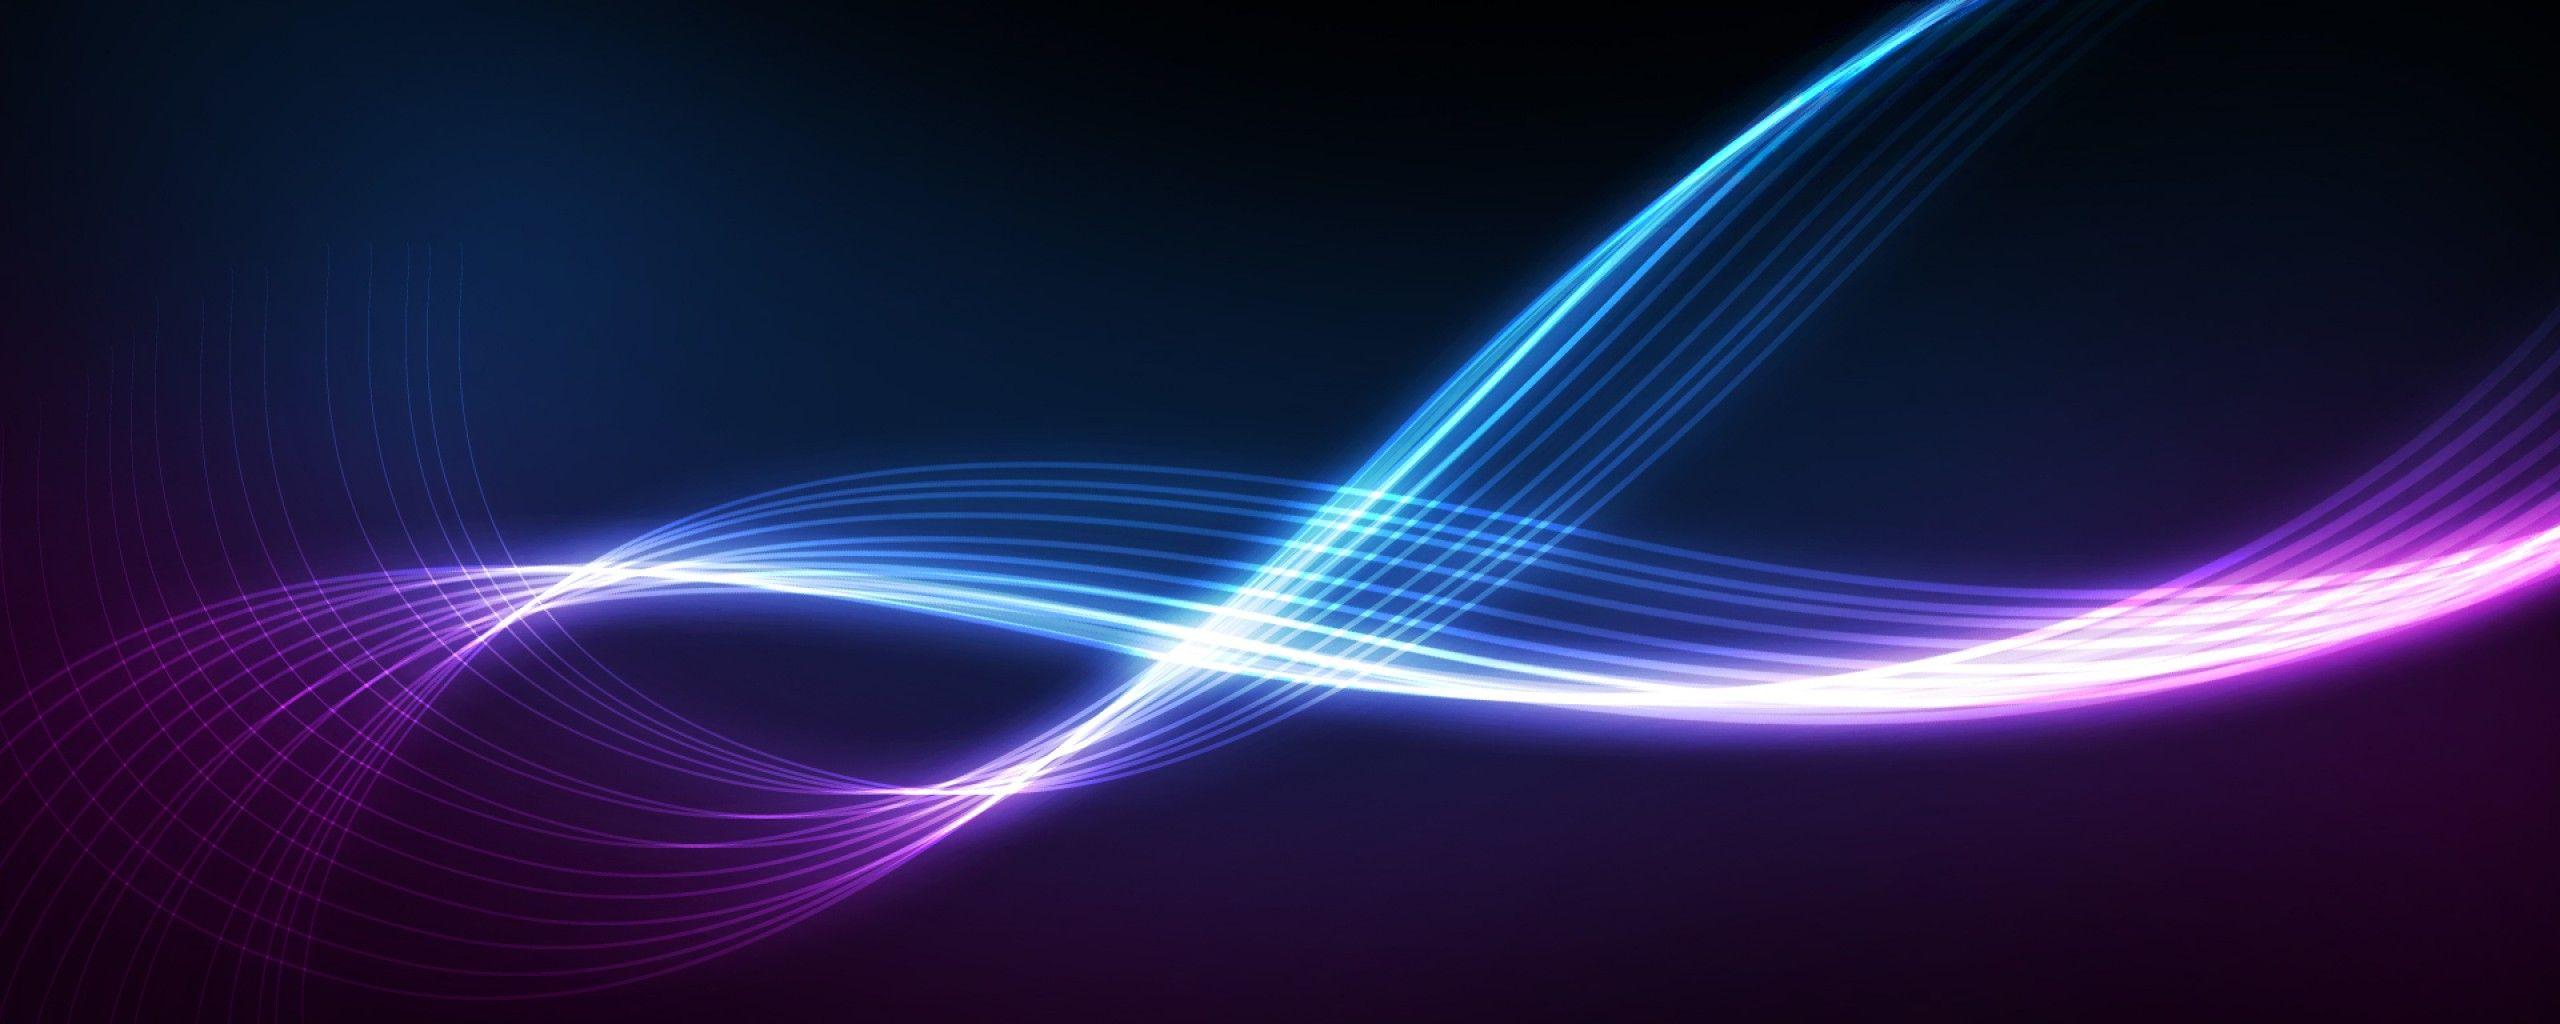 cool blue and purple wallpaper